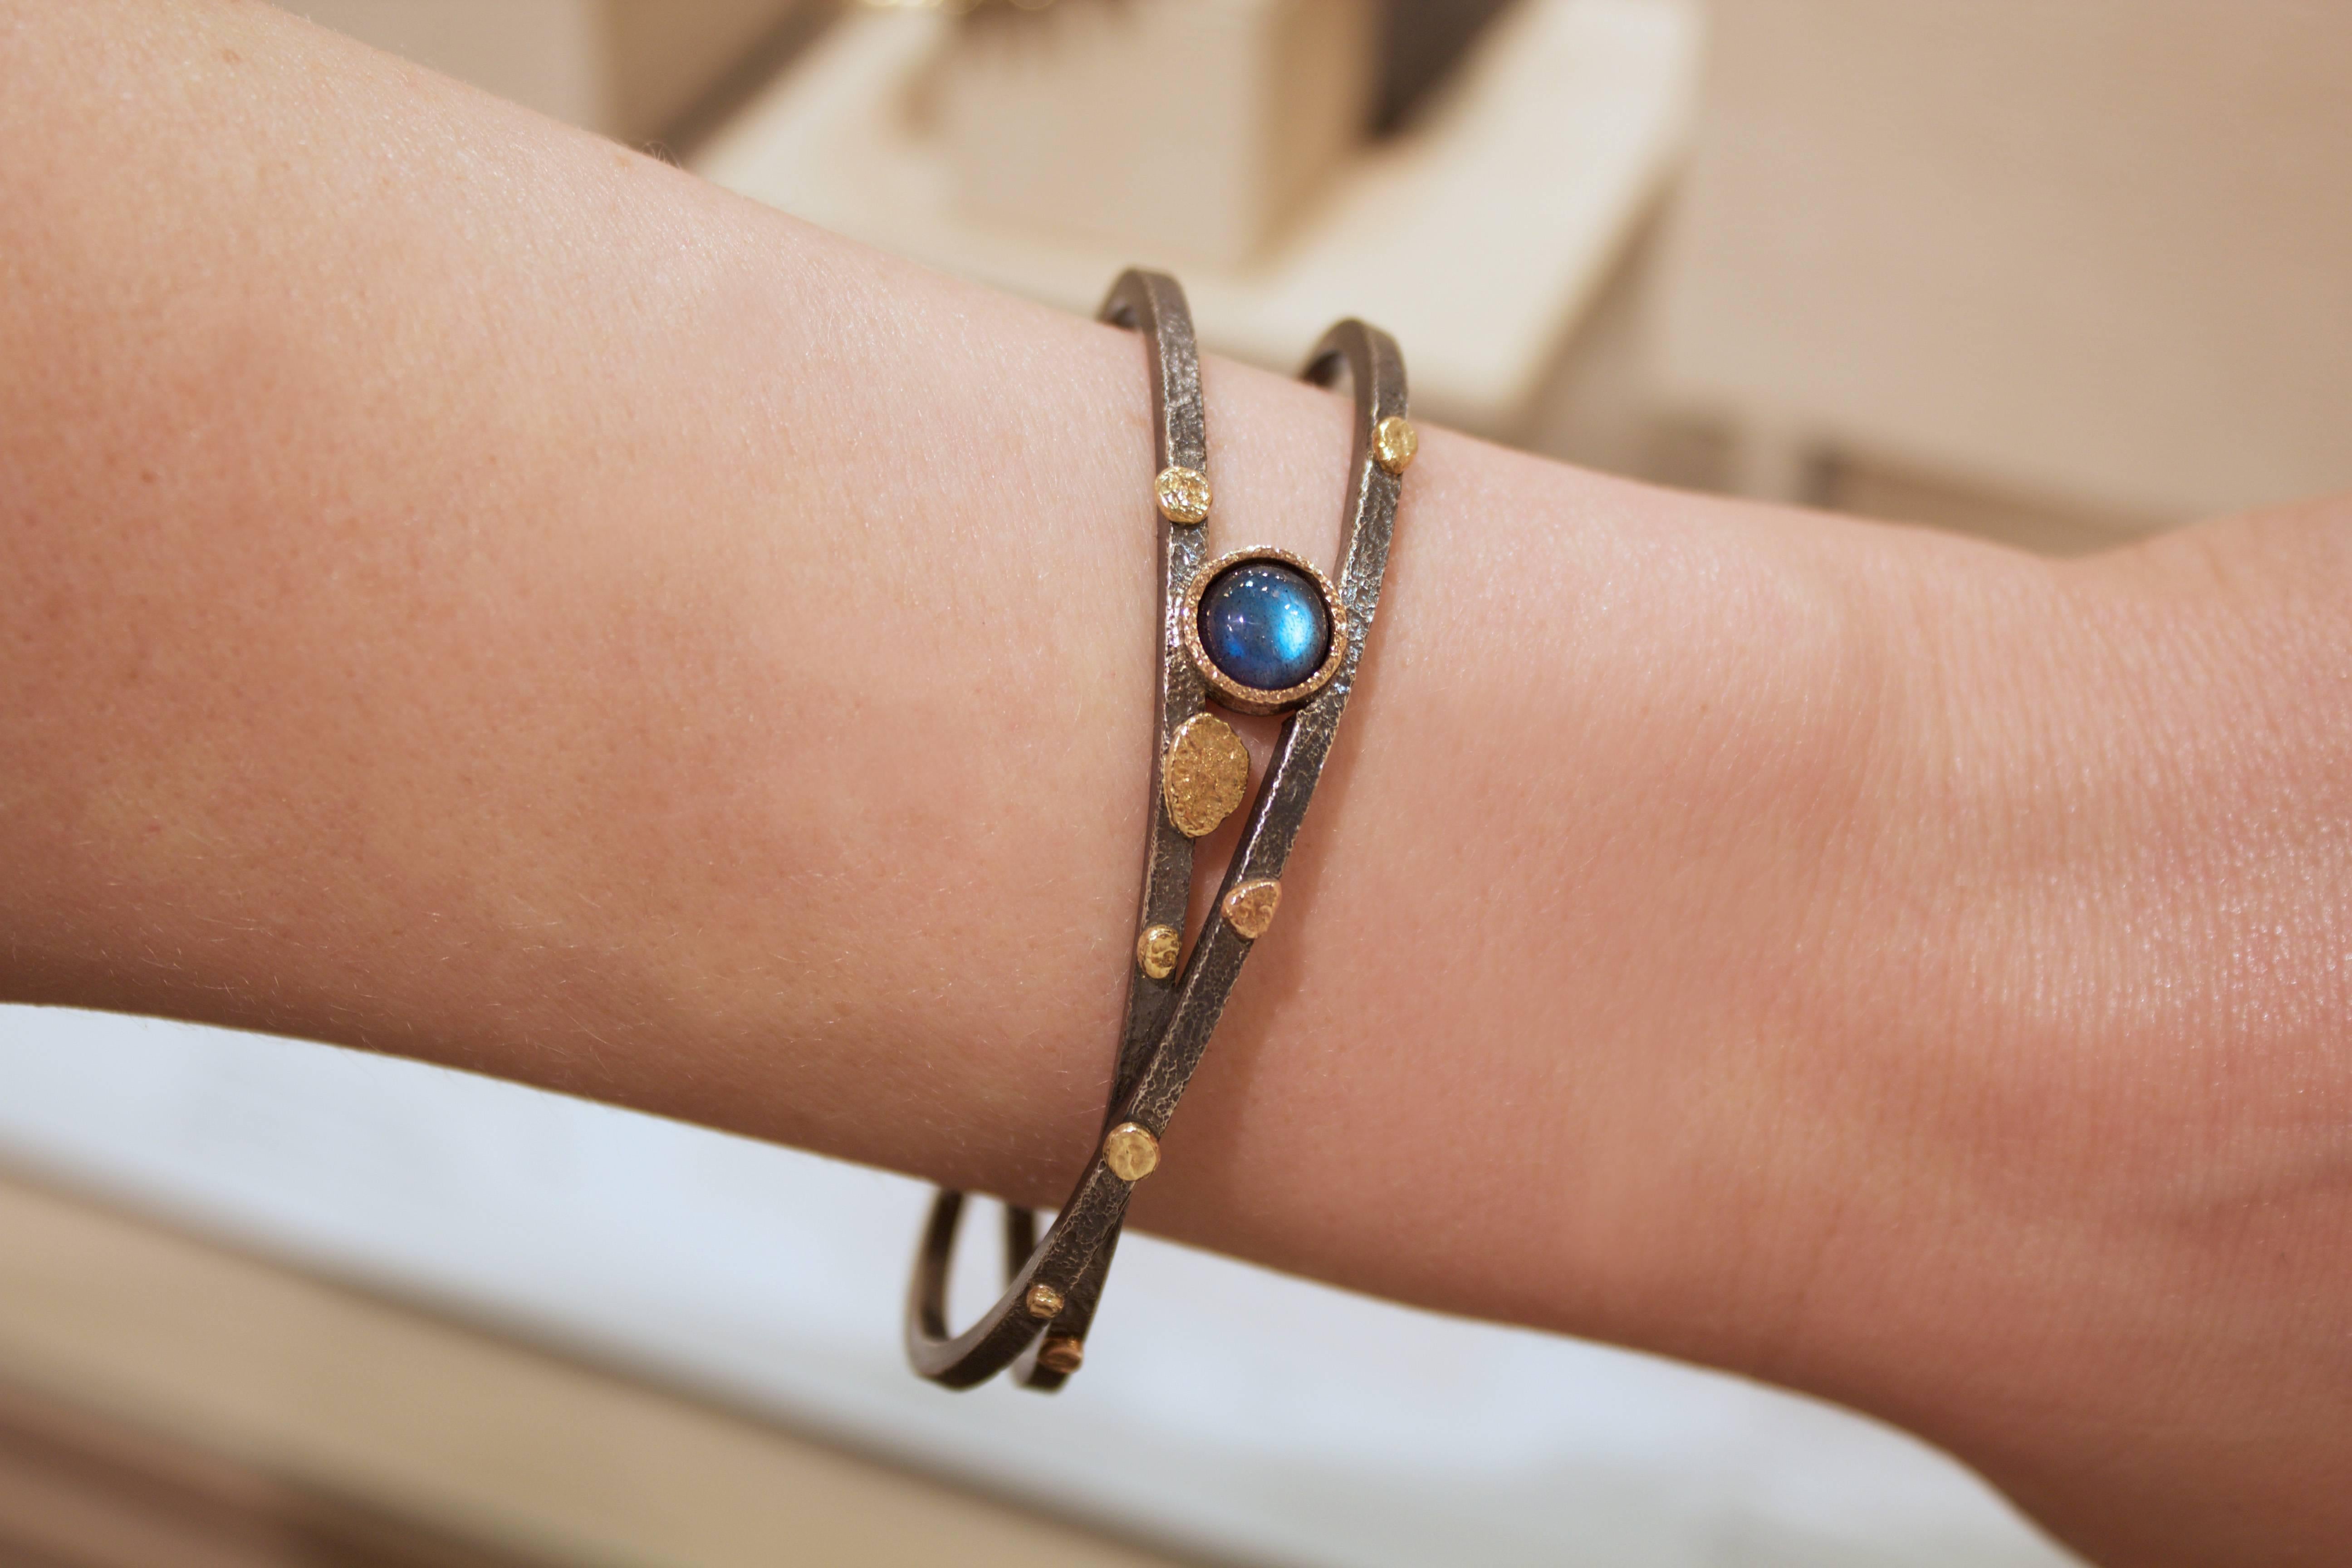 One of a Kind Criss Cross Bracelet handcrafted by jewelry artist Rona Fisher in highly textured oxidized sterling silver featuring a vibrant labradorite cabochon wrapped in 18k rose gold and accented by six 18k yellow gold and two 18k rose gold